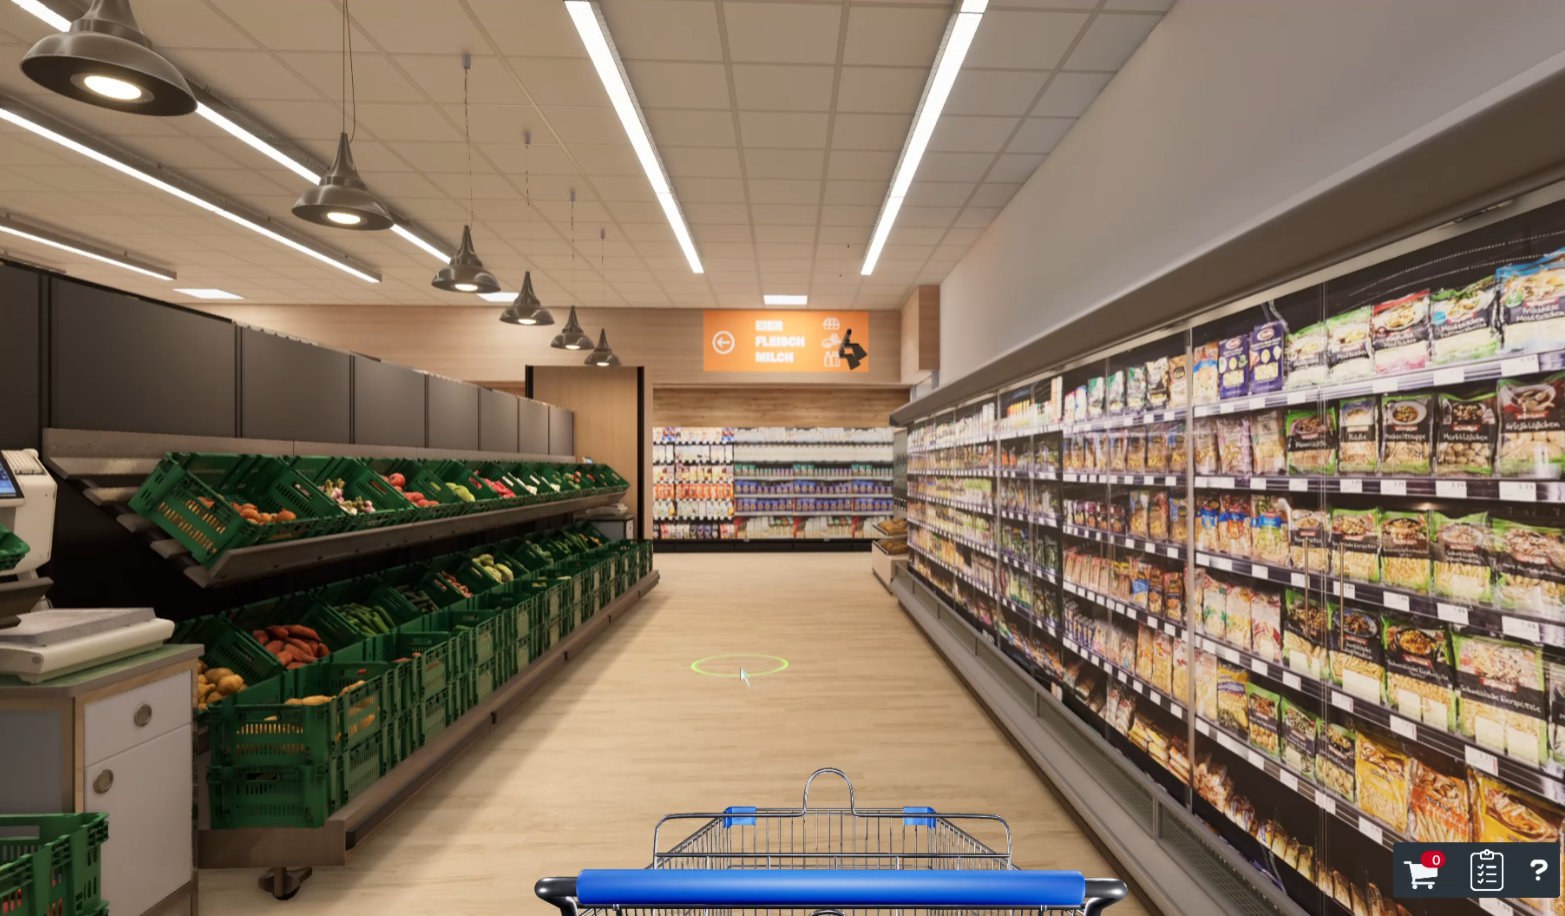 Shopping in a virtual supermarket